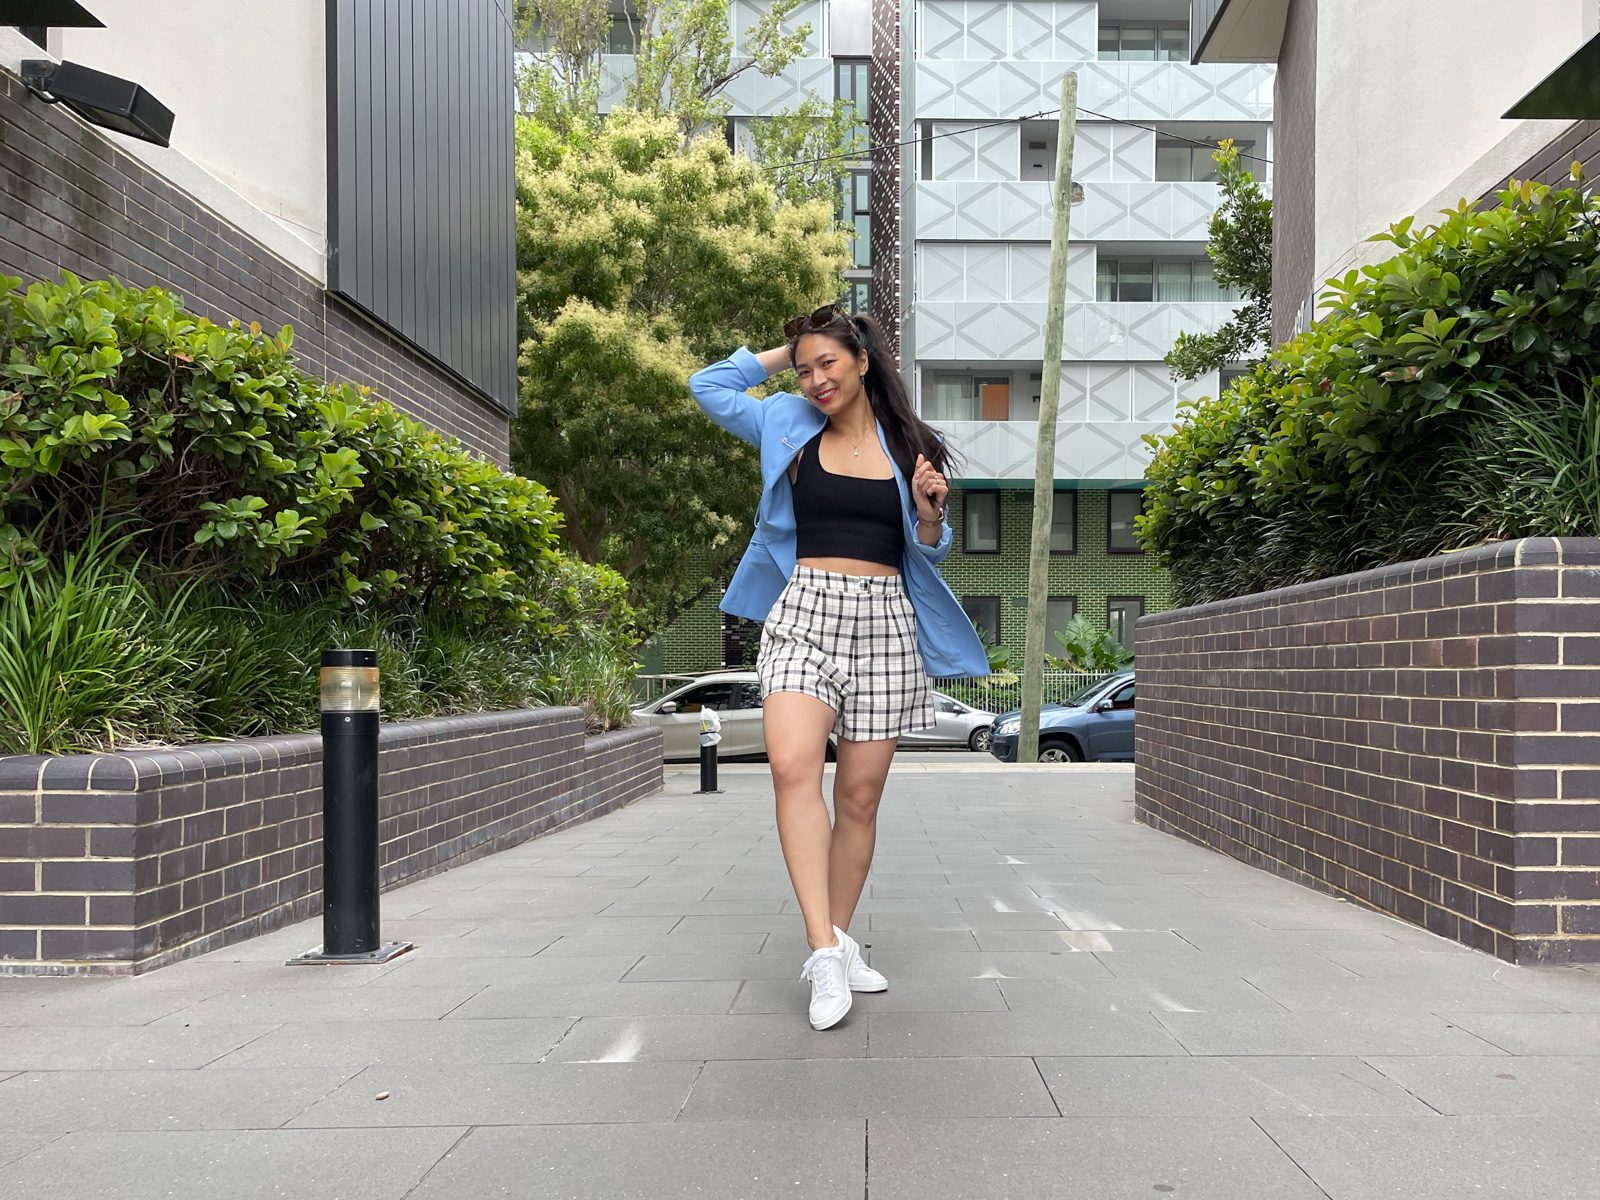 A woman posing in a walkway between two brick walls with plants in them. Some apartment buildings are in the background. The woman is wearing a blue blazer over a black crop top and black-and-white plaid shorts. She has white sneakers on. Her long, dark hair is in a ponytail which she is holding the end of with one hand. Her other arm is bent at the elbow with her hand behind her head. One of her knees is bent.